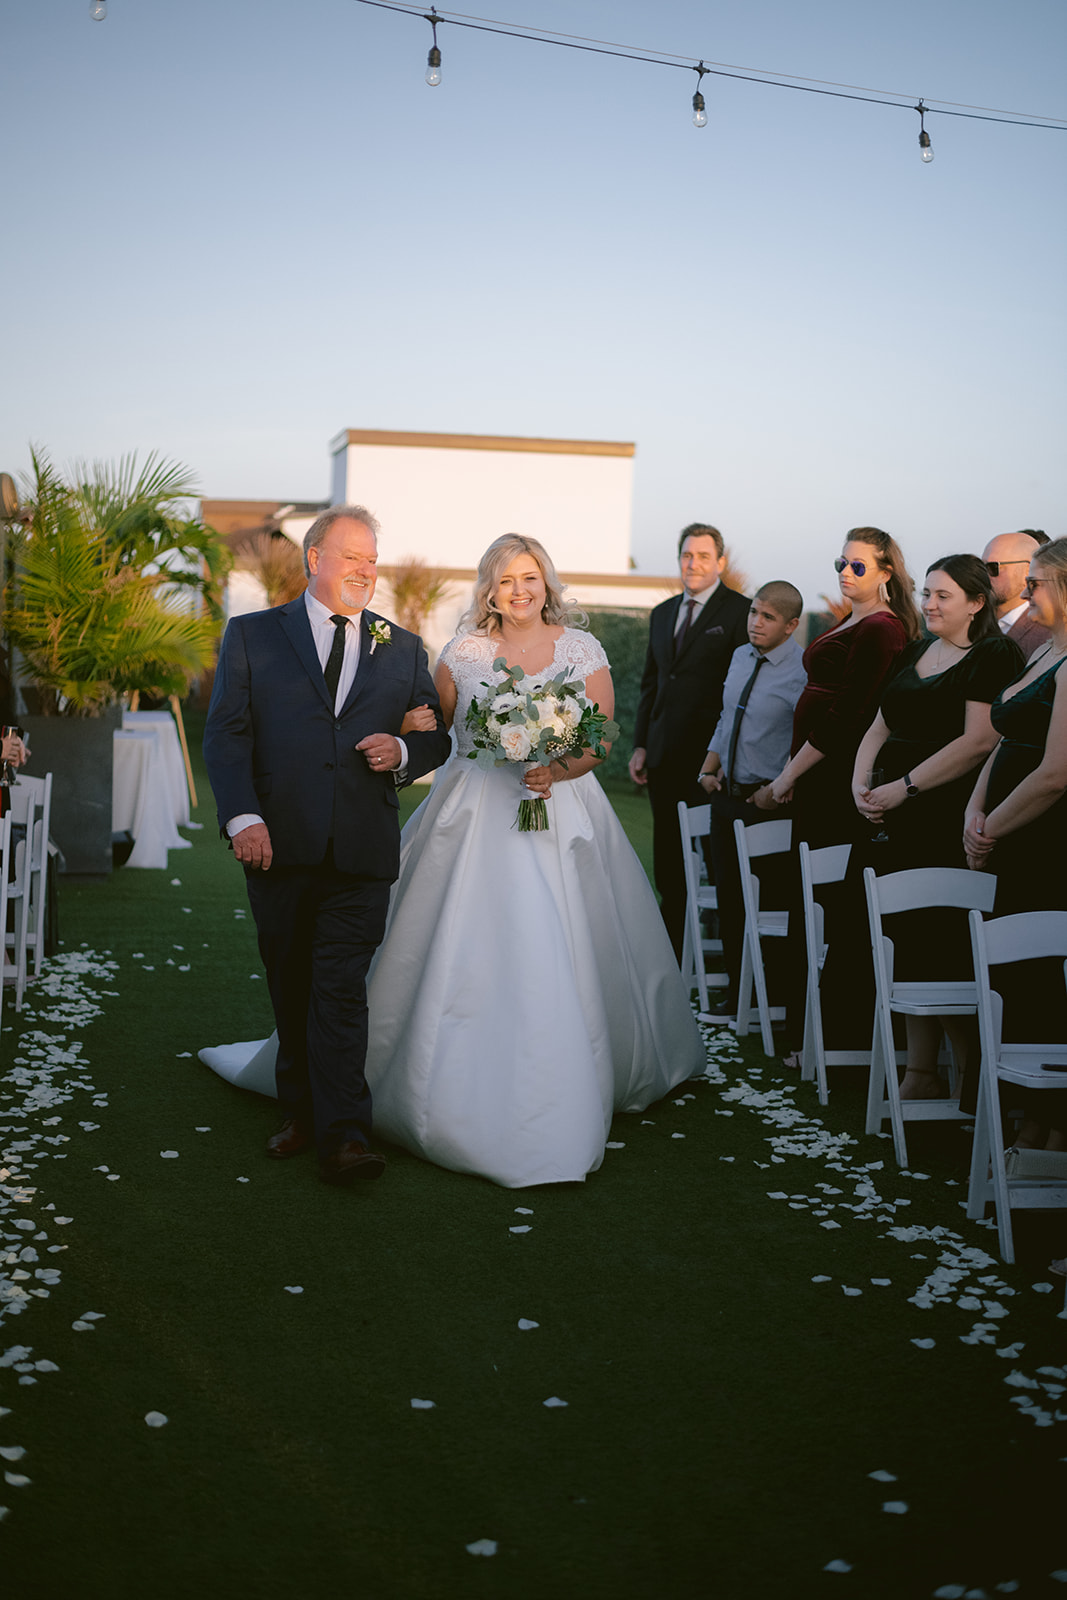 Hotel Zamora Wedding: Bride and Groom's Sweet Kiss by the Water
